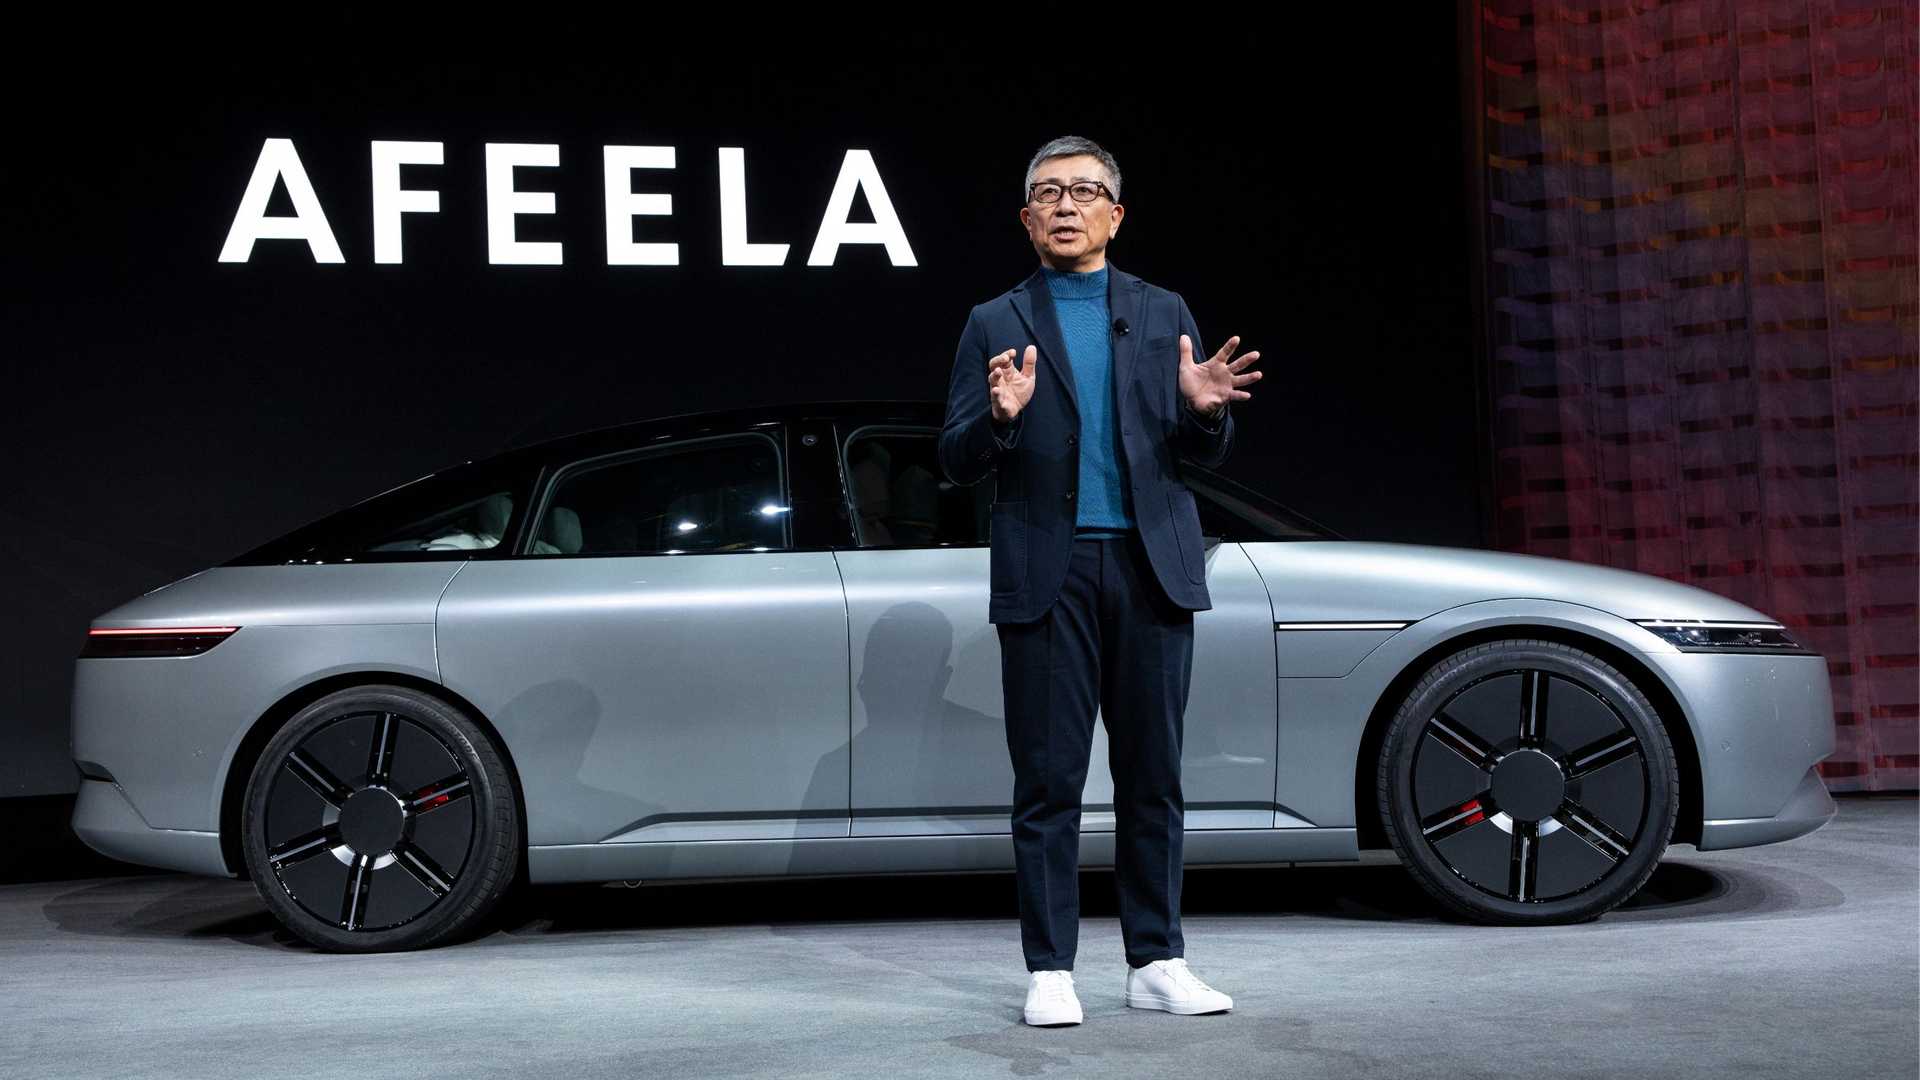 afeela ev to be capable of level 3 self-driving thanks to qualcomm chips